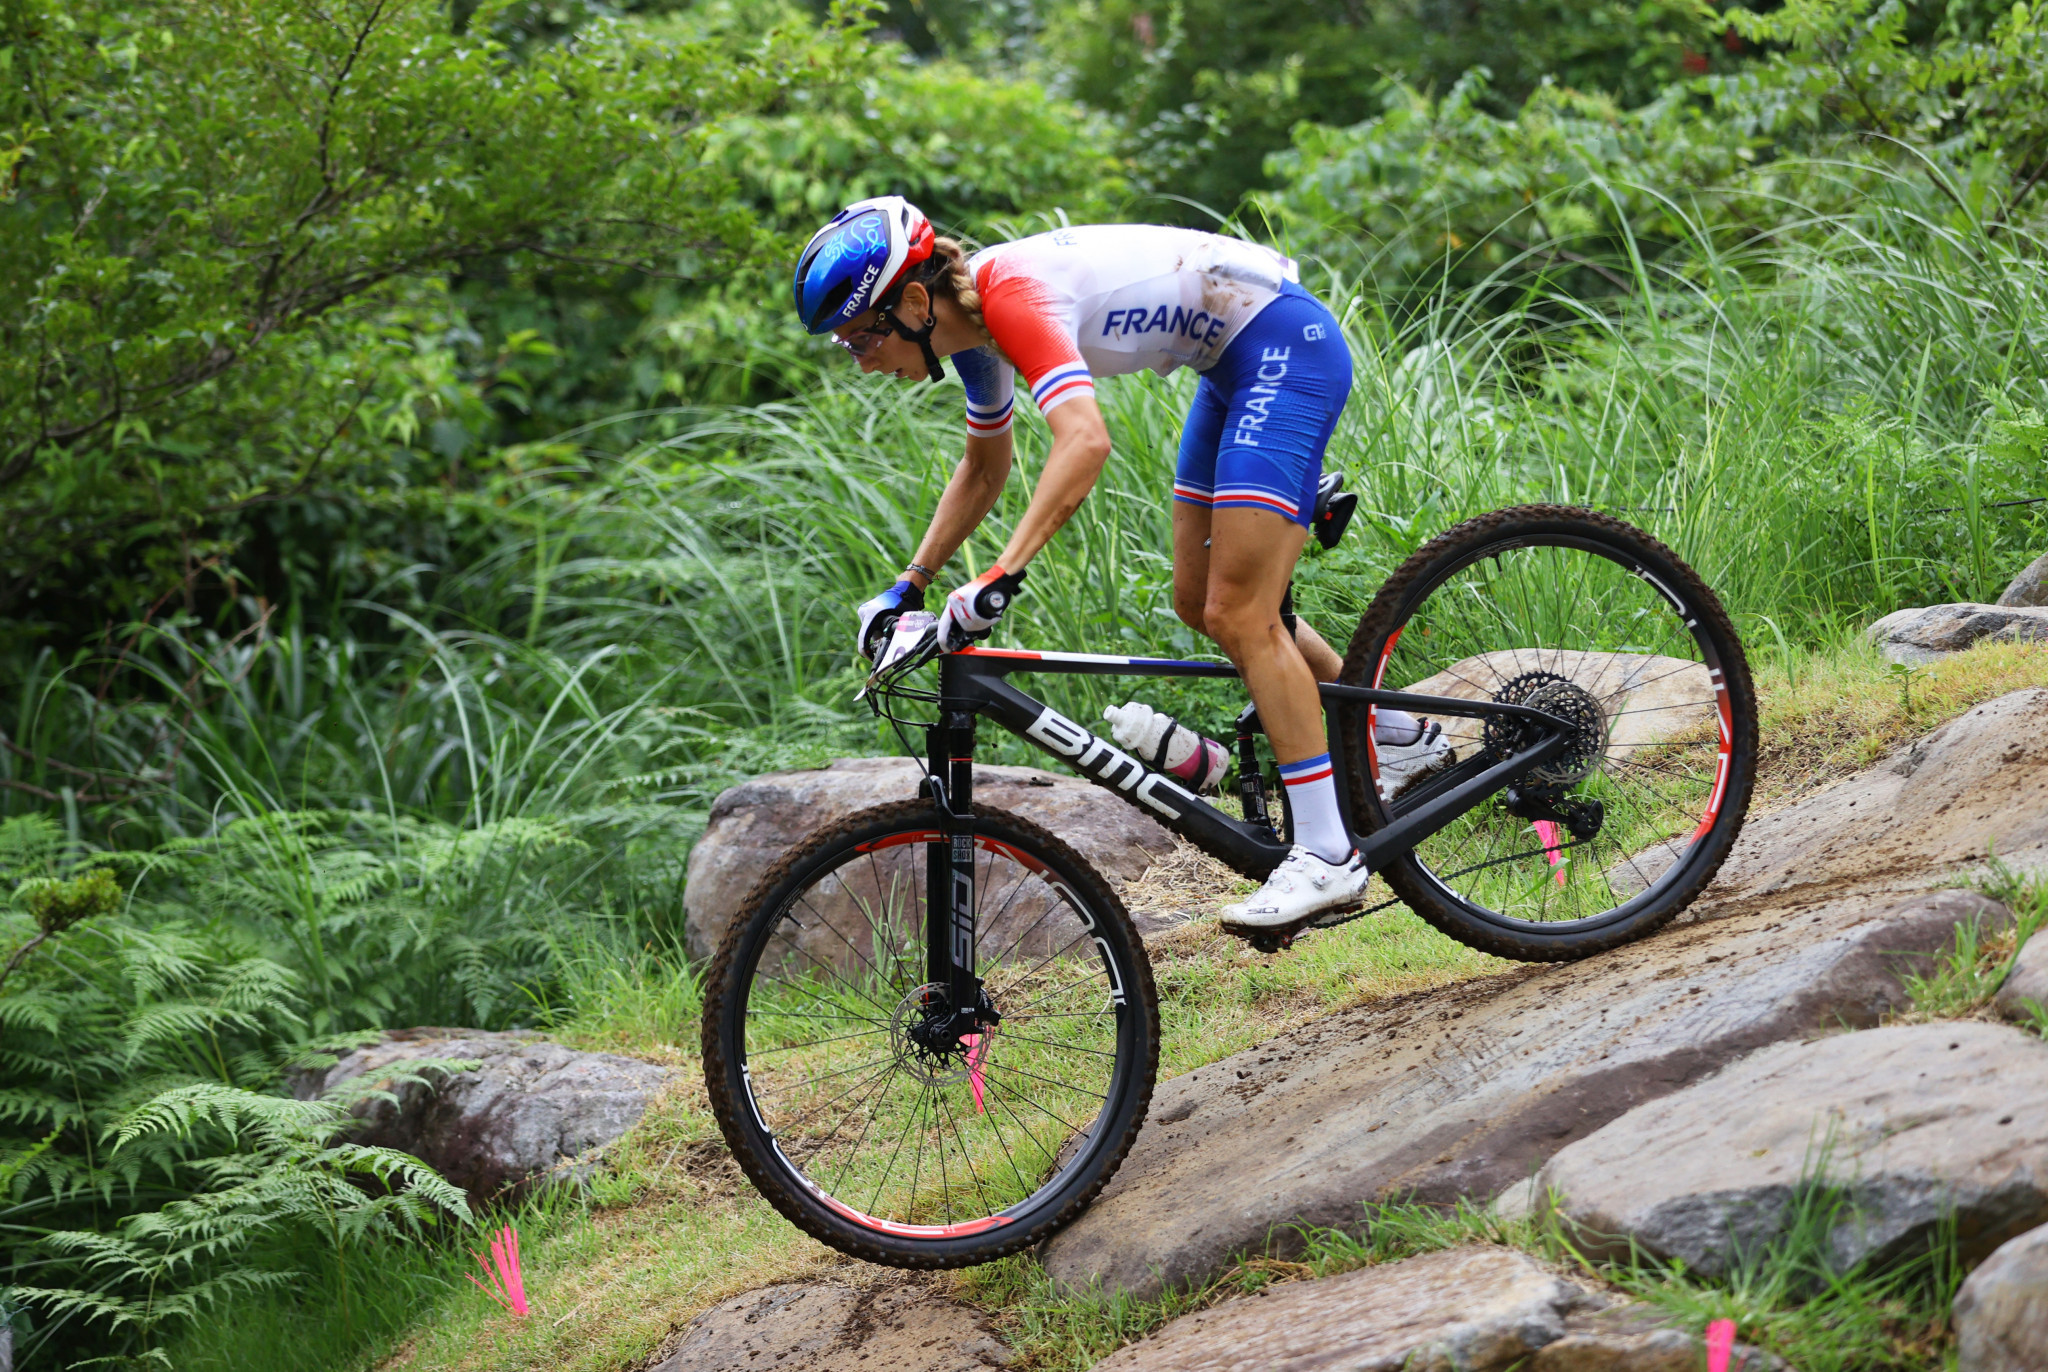 Pauline Ferrand Prevot, who came 10th in the Tokyo 2020 women's cross-country mountain biking final, won the women's elite race at the 2021 Elite European Mountain Bike Championships ©Getty Images